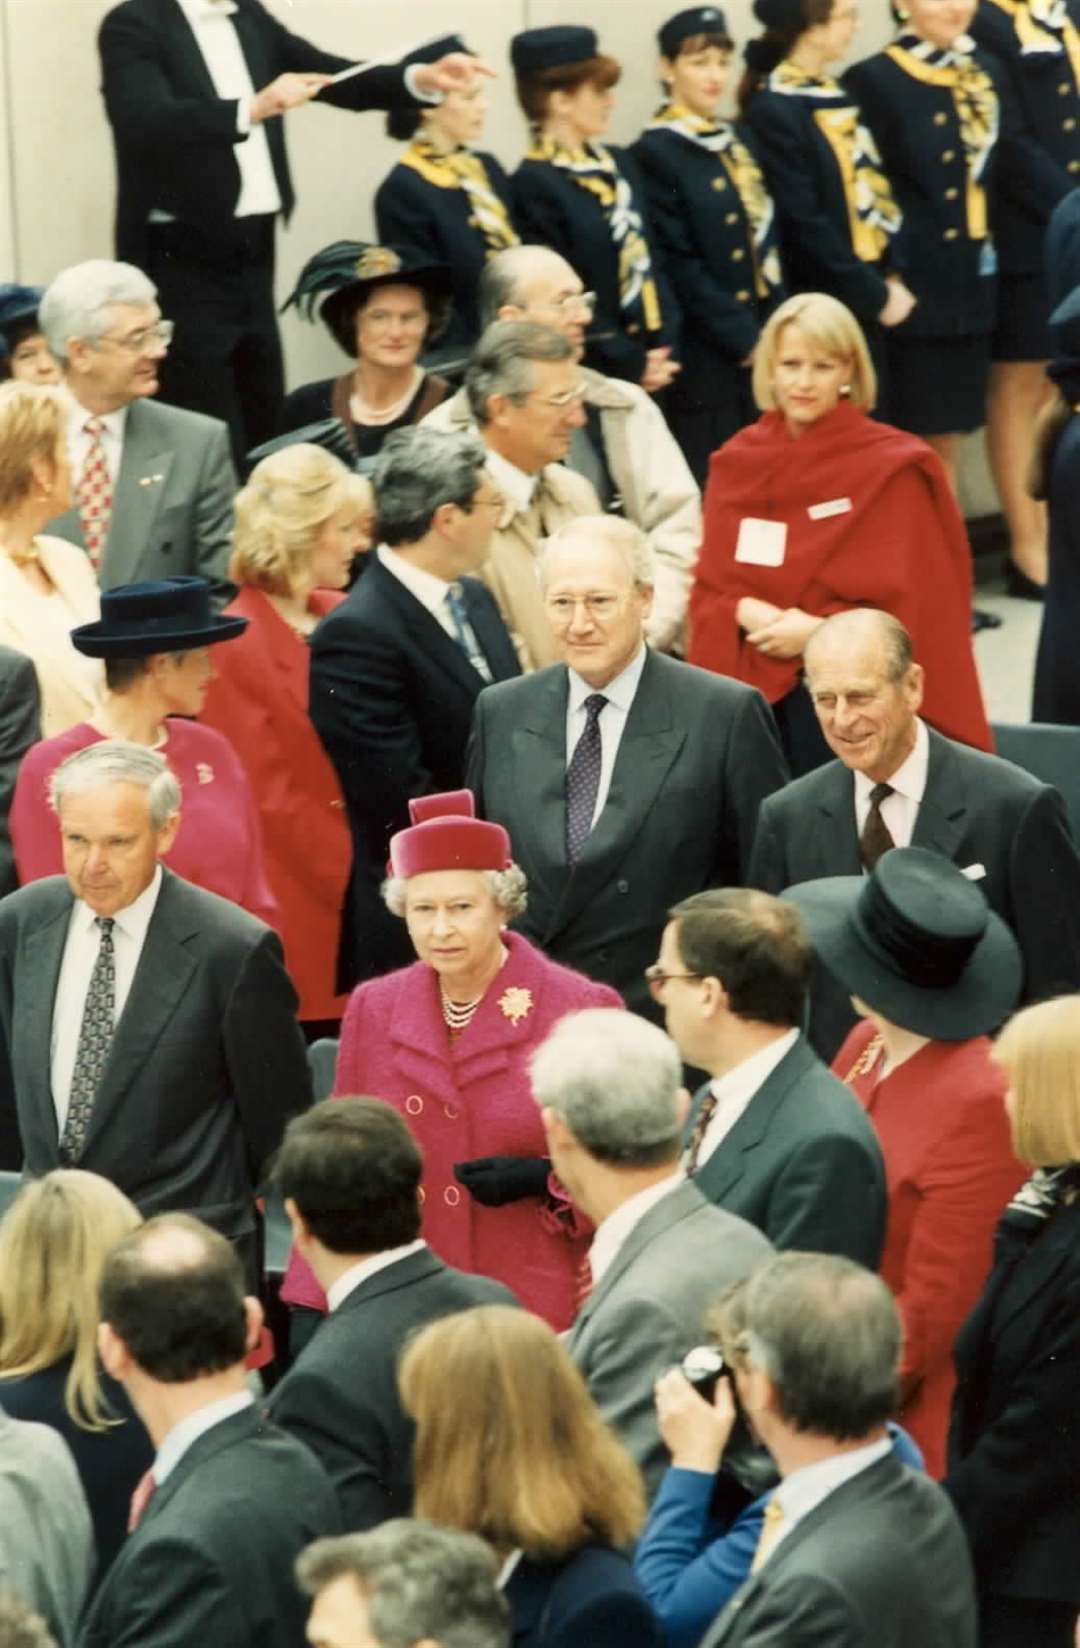 The Queen arrived at the opening ceremony of the Channel Tunnel in 1994